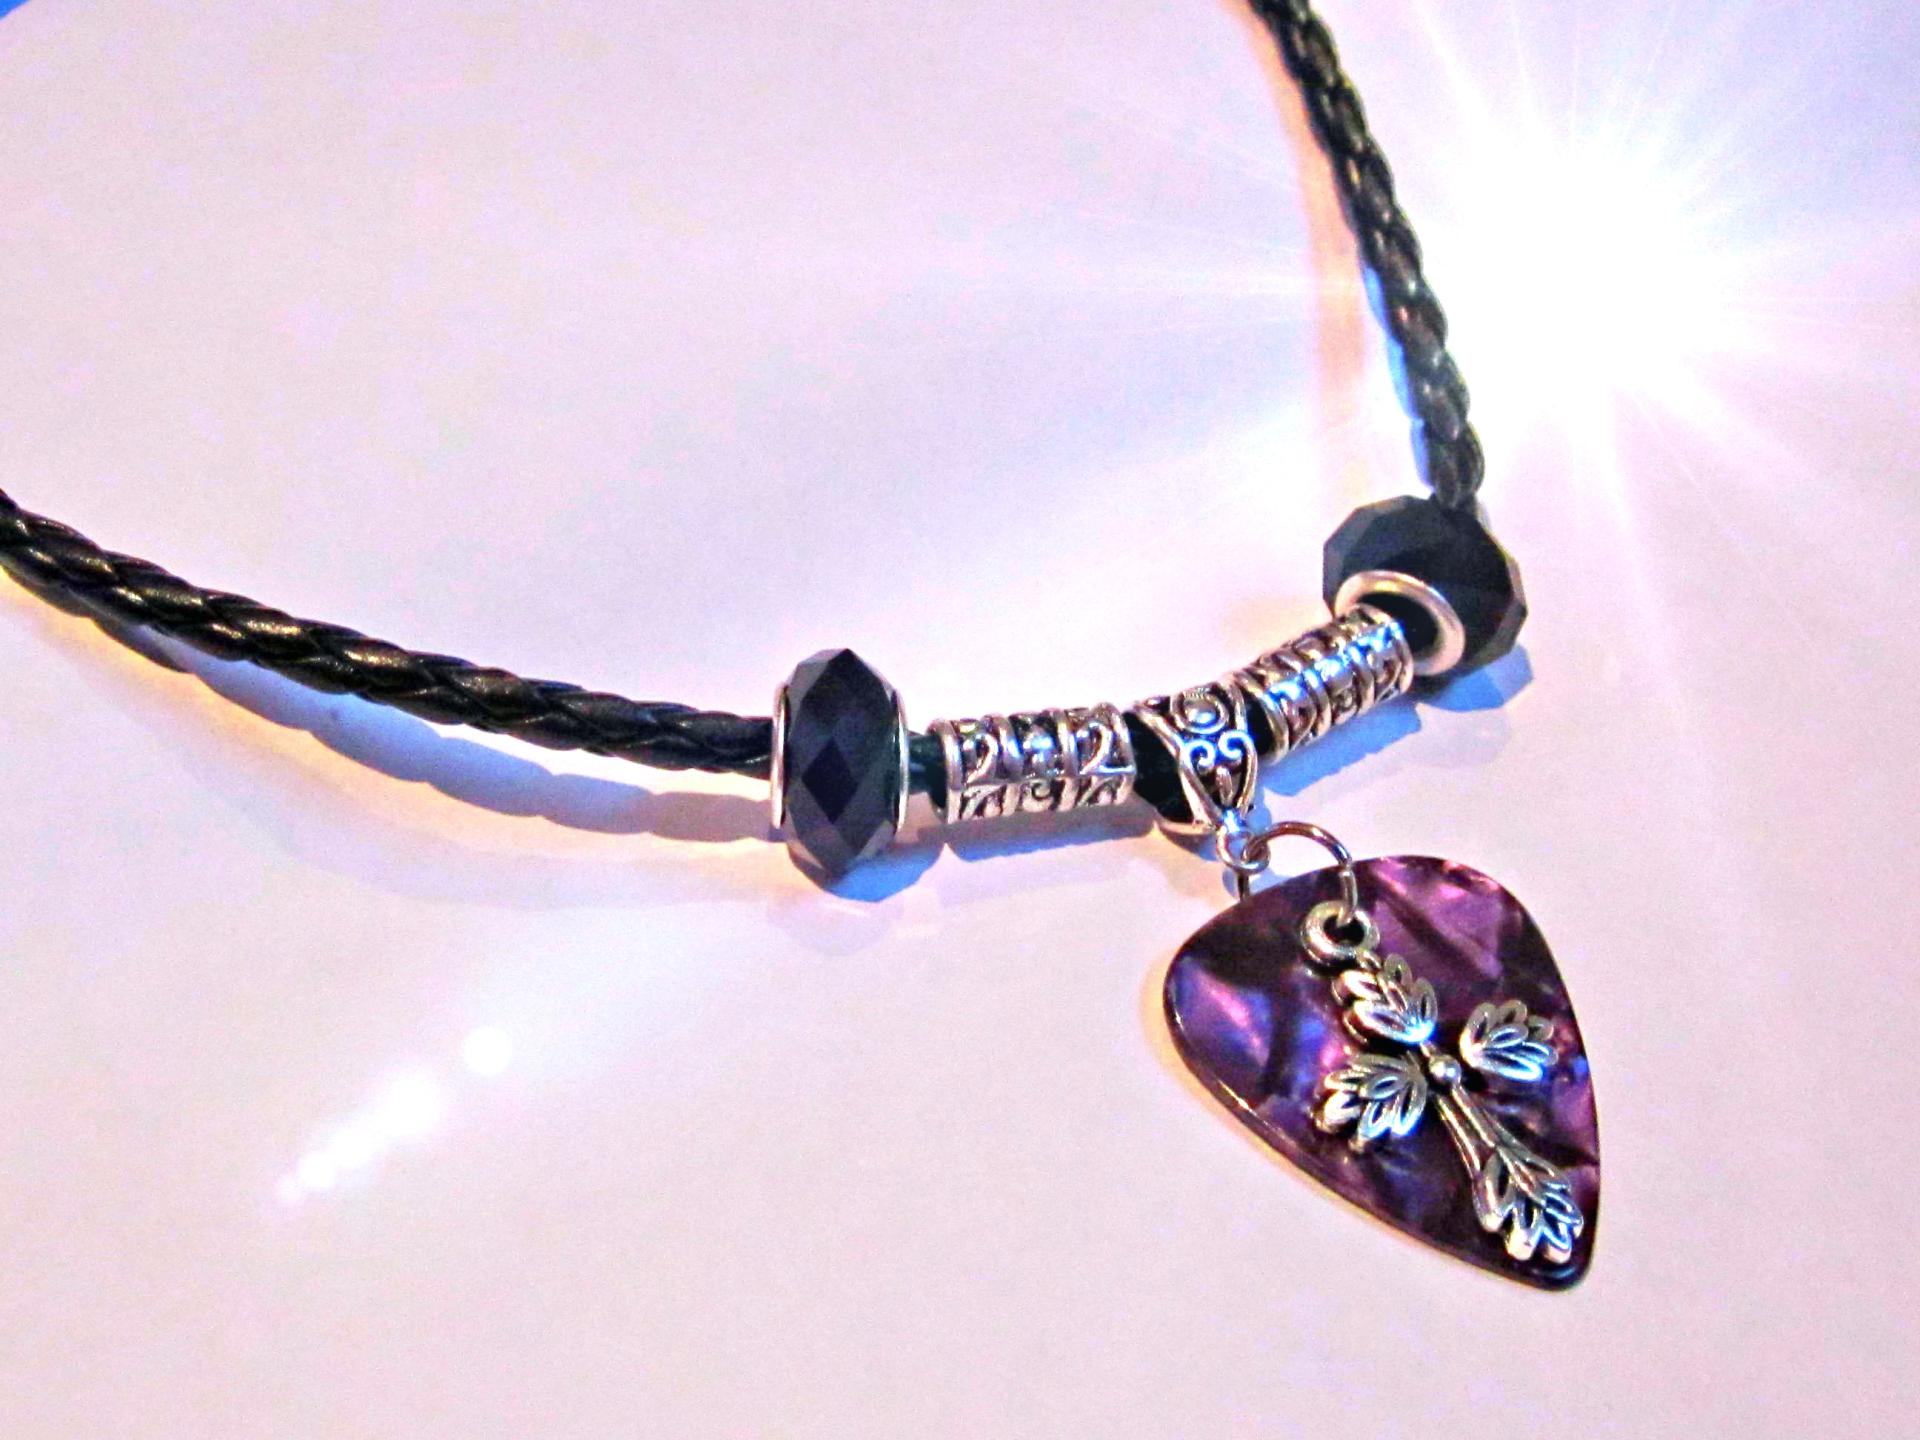 Guitar Pick Necklace With A Cross Charm